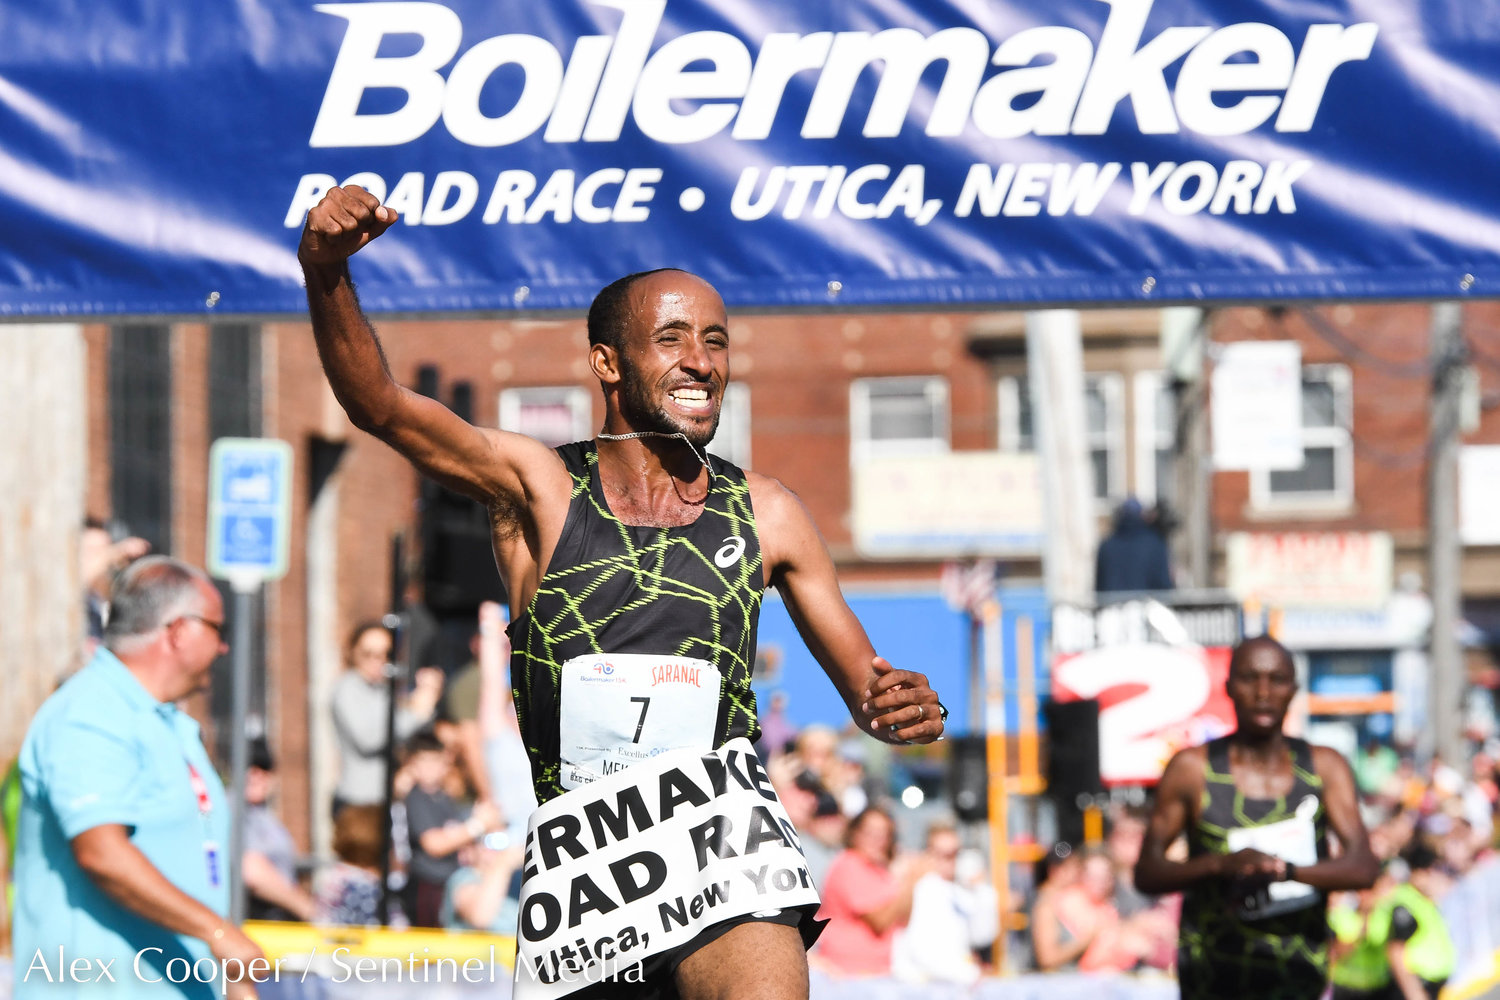 Jemal Yimer Mekonnen celebrates after finishing 1st in the men's 15K during the 45th Boilermaker Road Race on Sunday, July 10 in Utica.